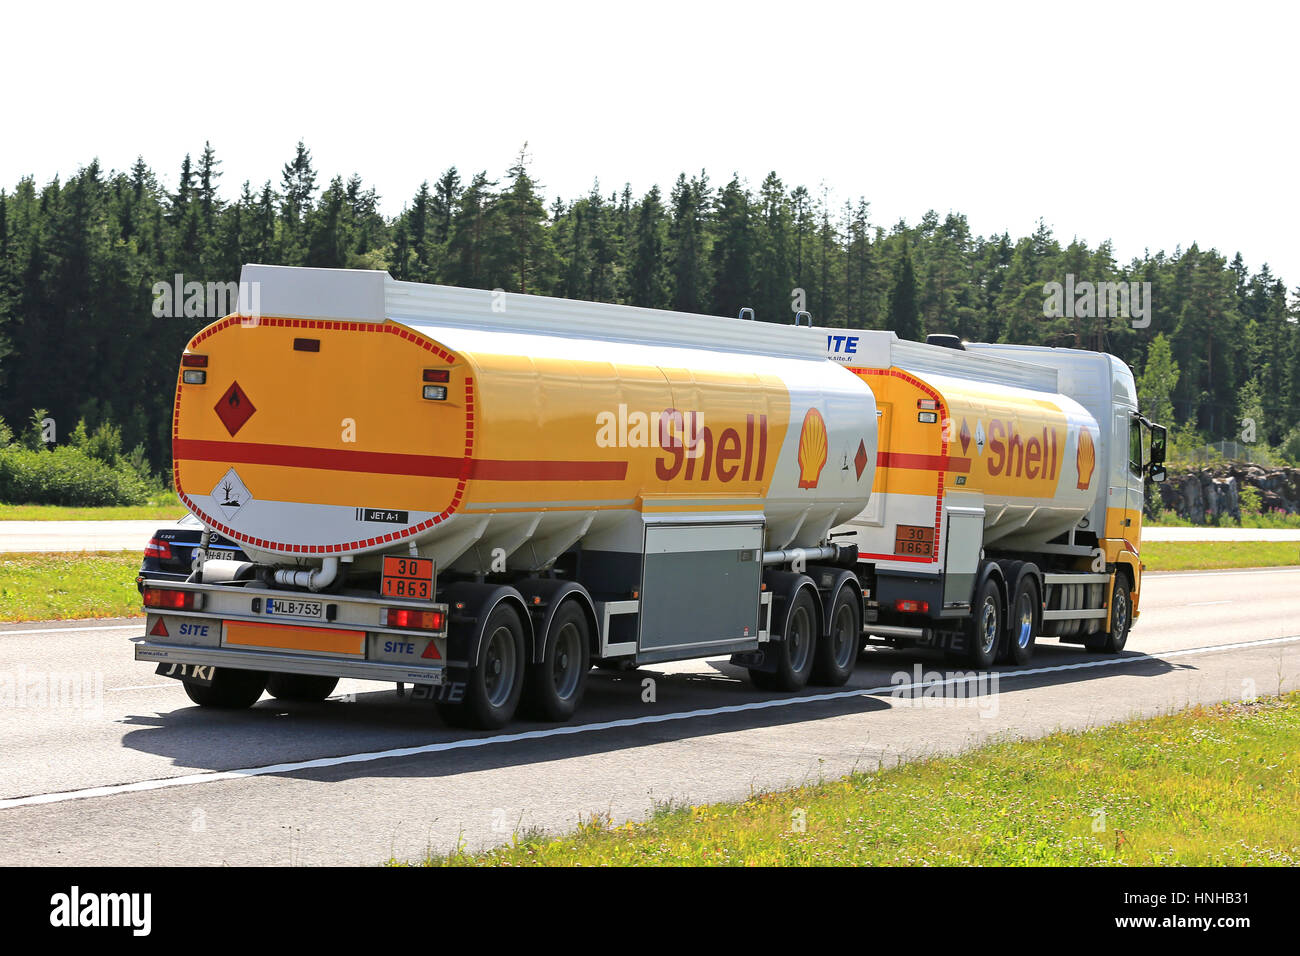 PAIMIO, FINLAND - JULY 1, 2016: Royal Dutch Shell plc, commonly known as Shell, fuel truck hauls jet fuel along freeway on a sunny day if summer. The  Stock Photo